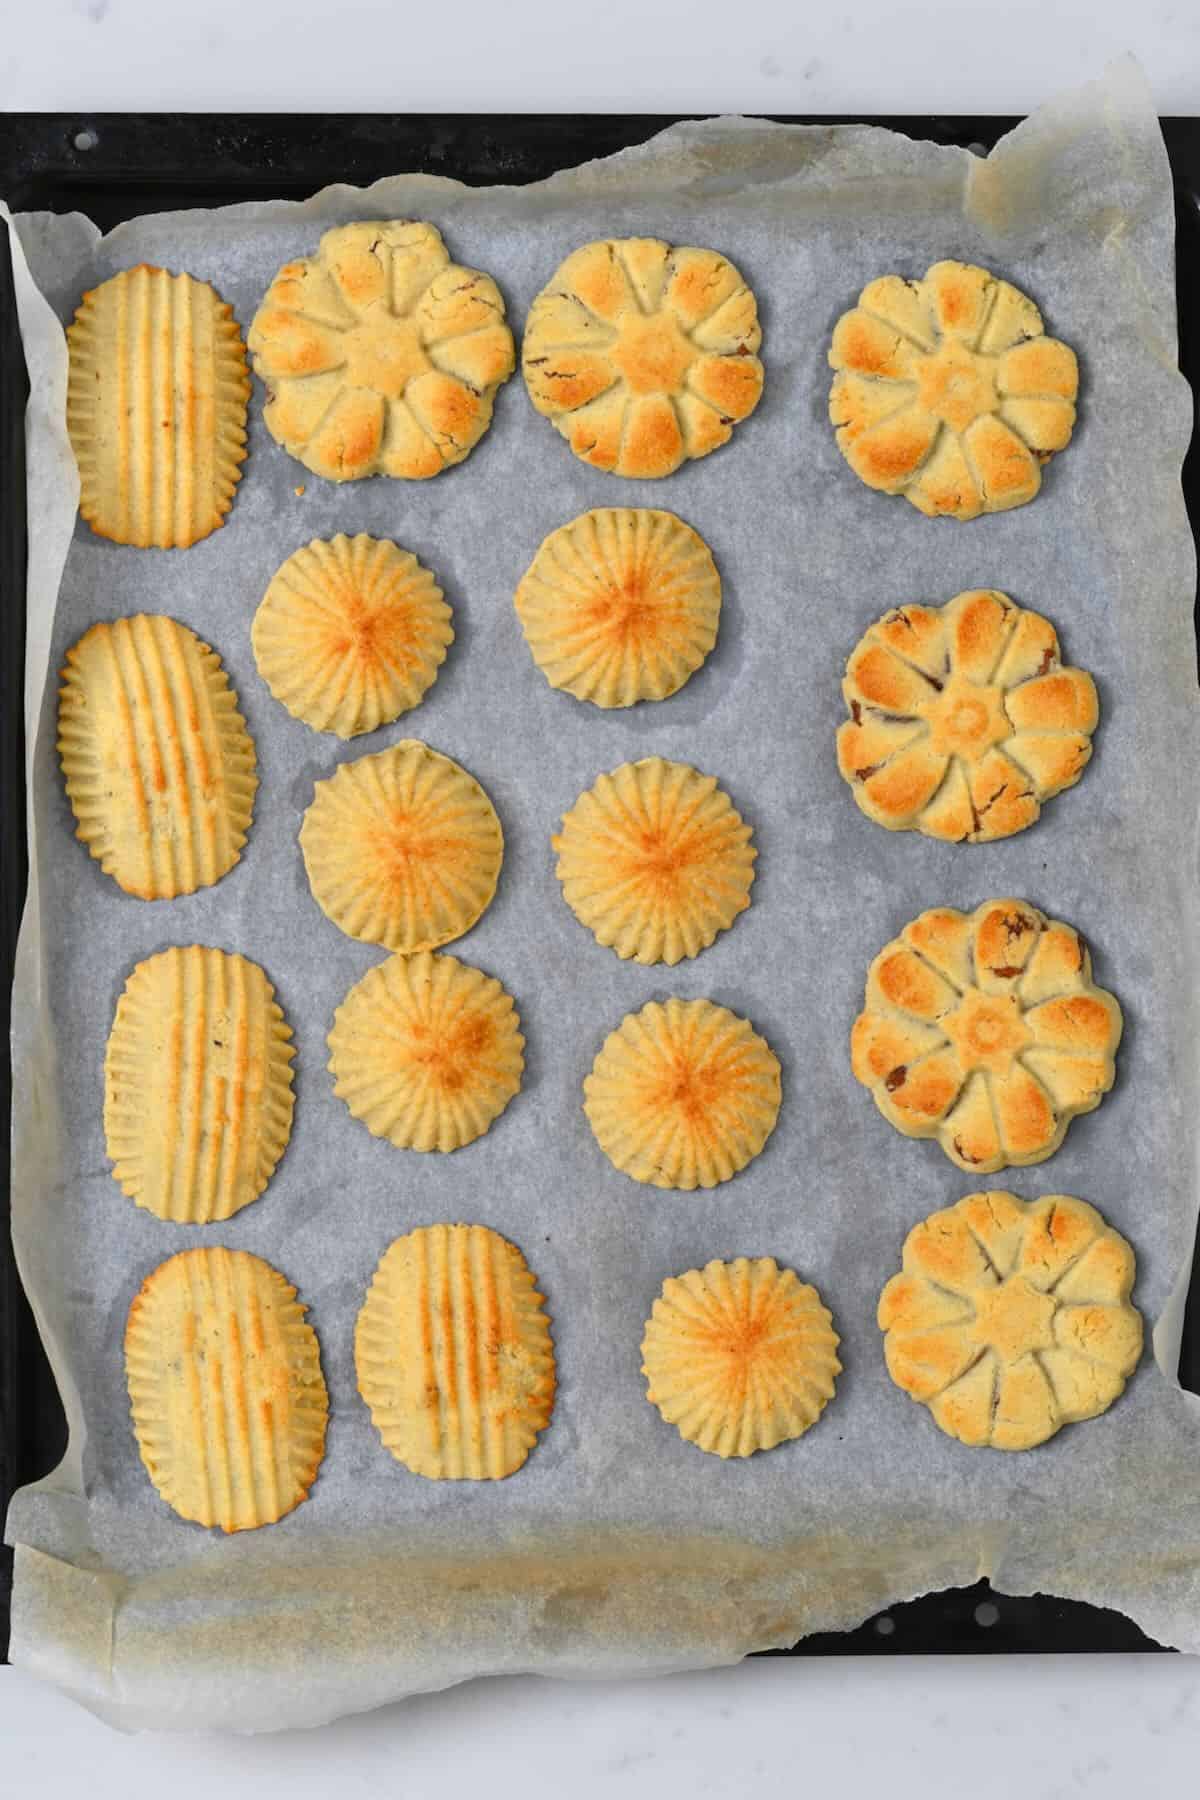 Freshly baked maamoul cookies on a baking tray